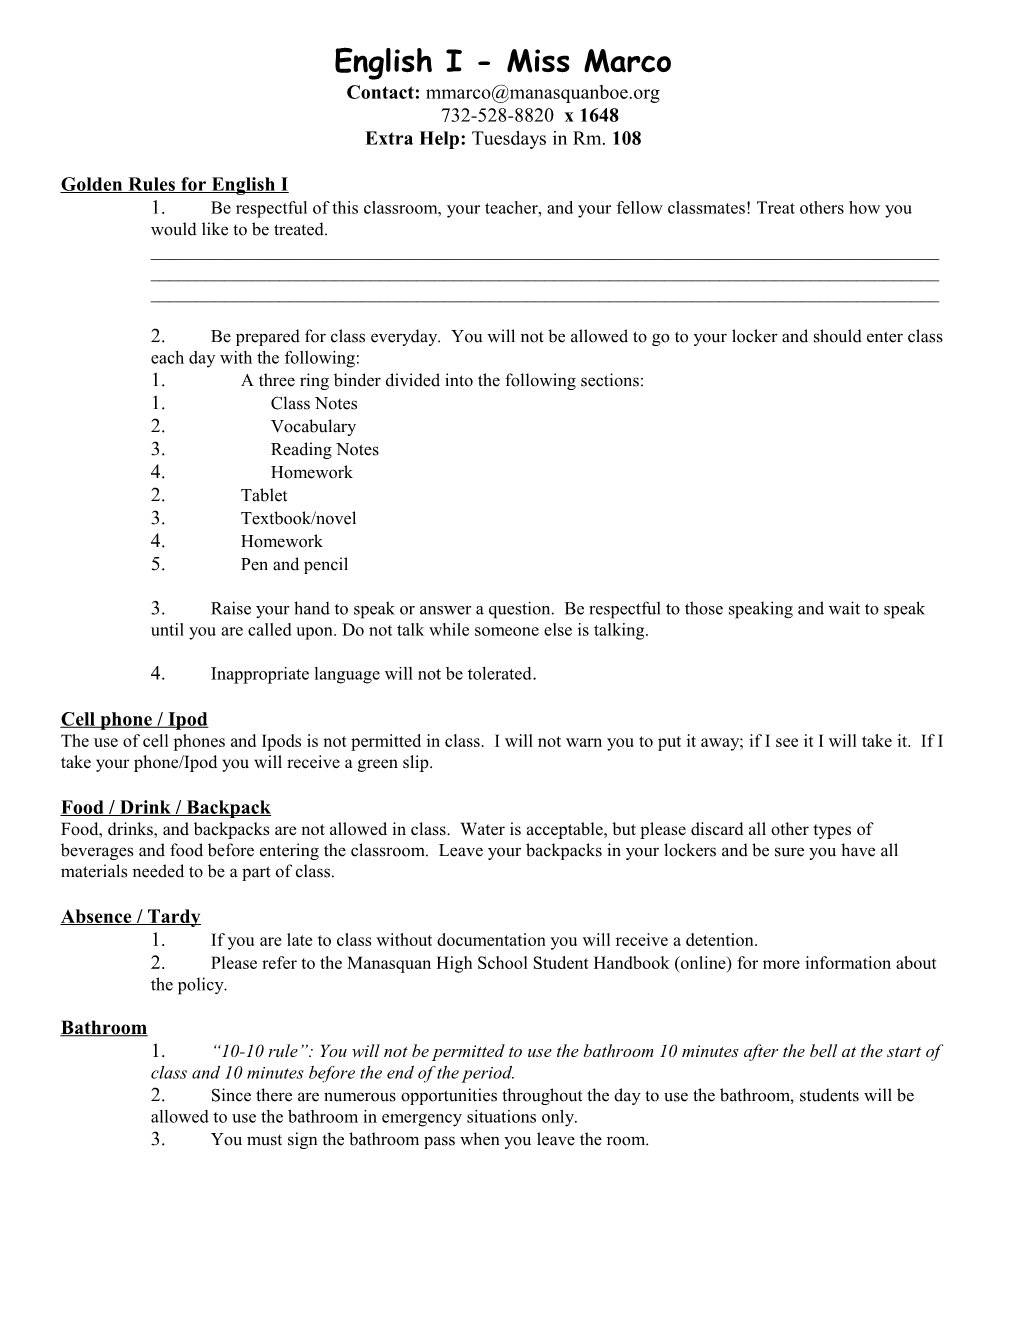 Golden Rules for English I